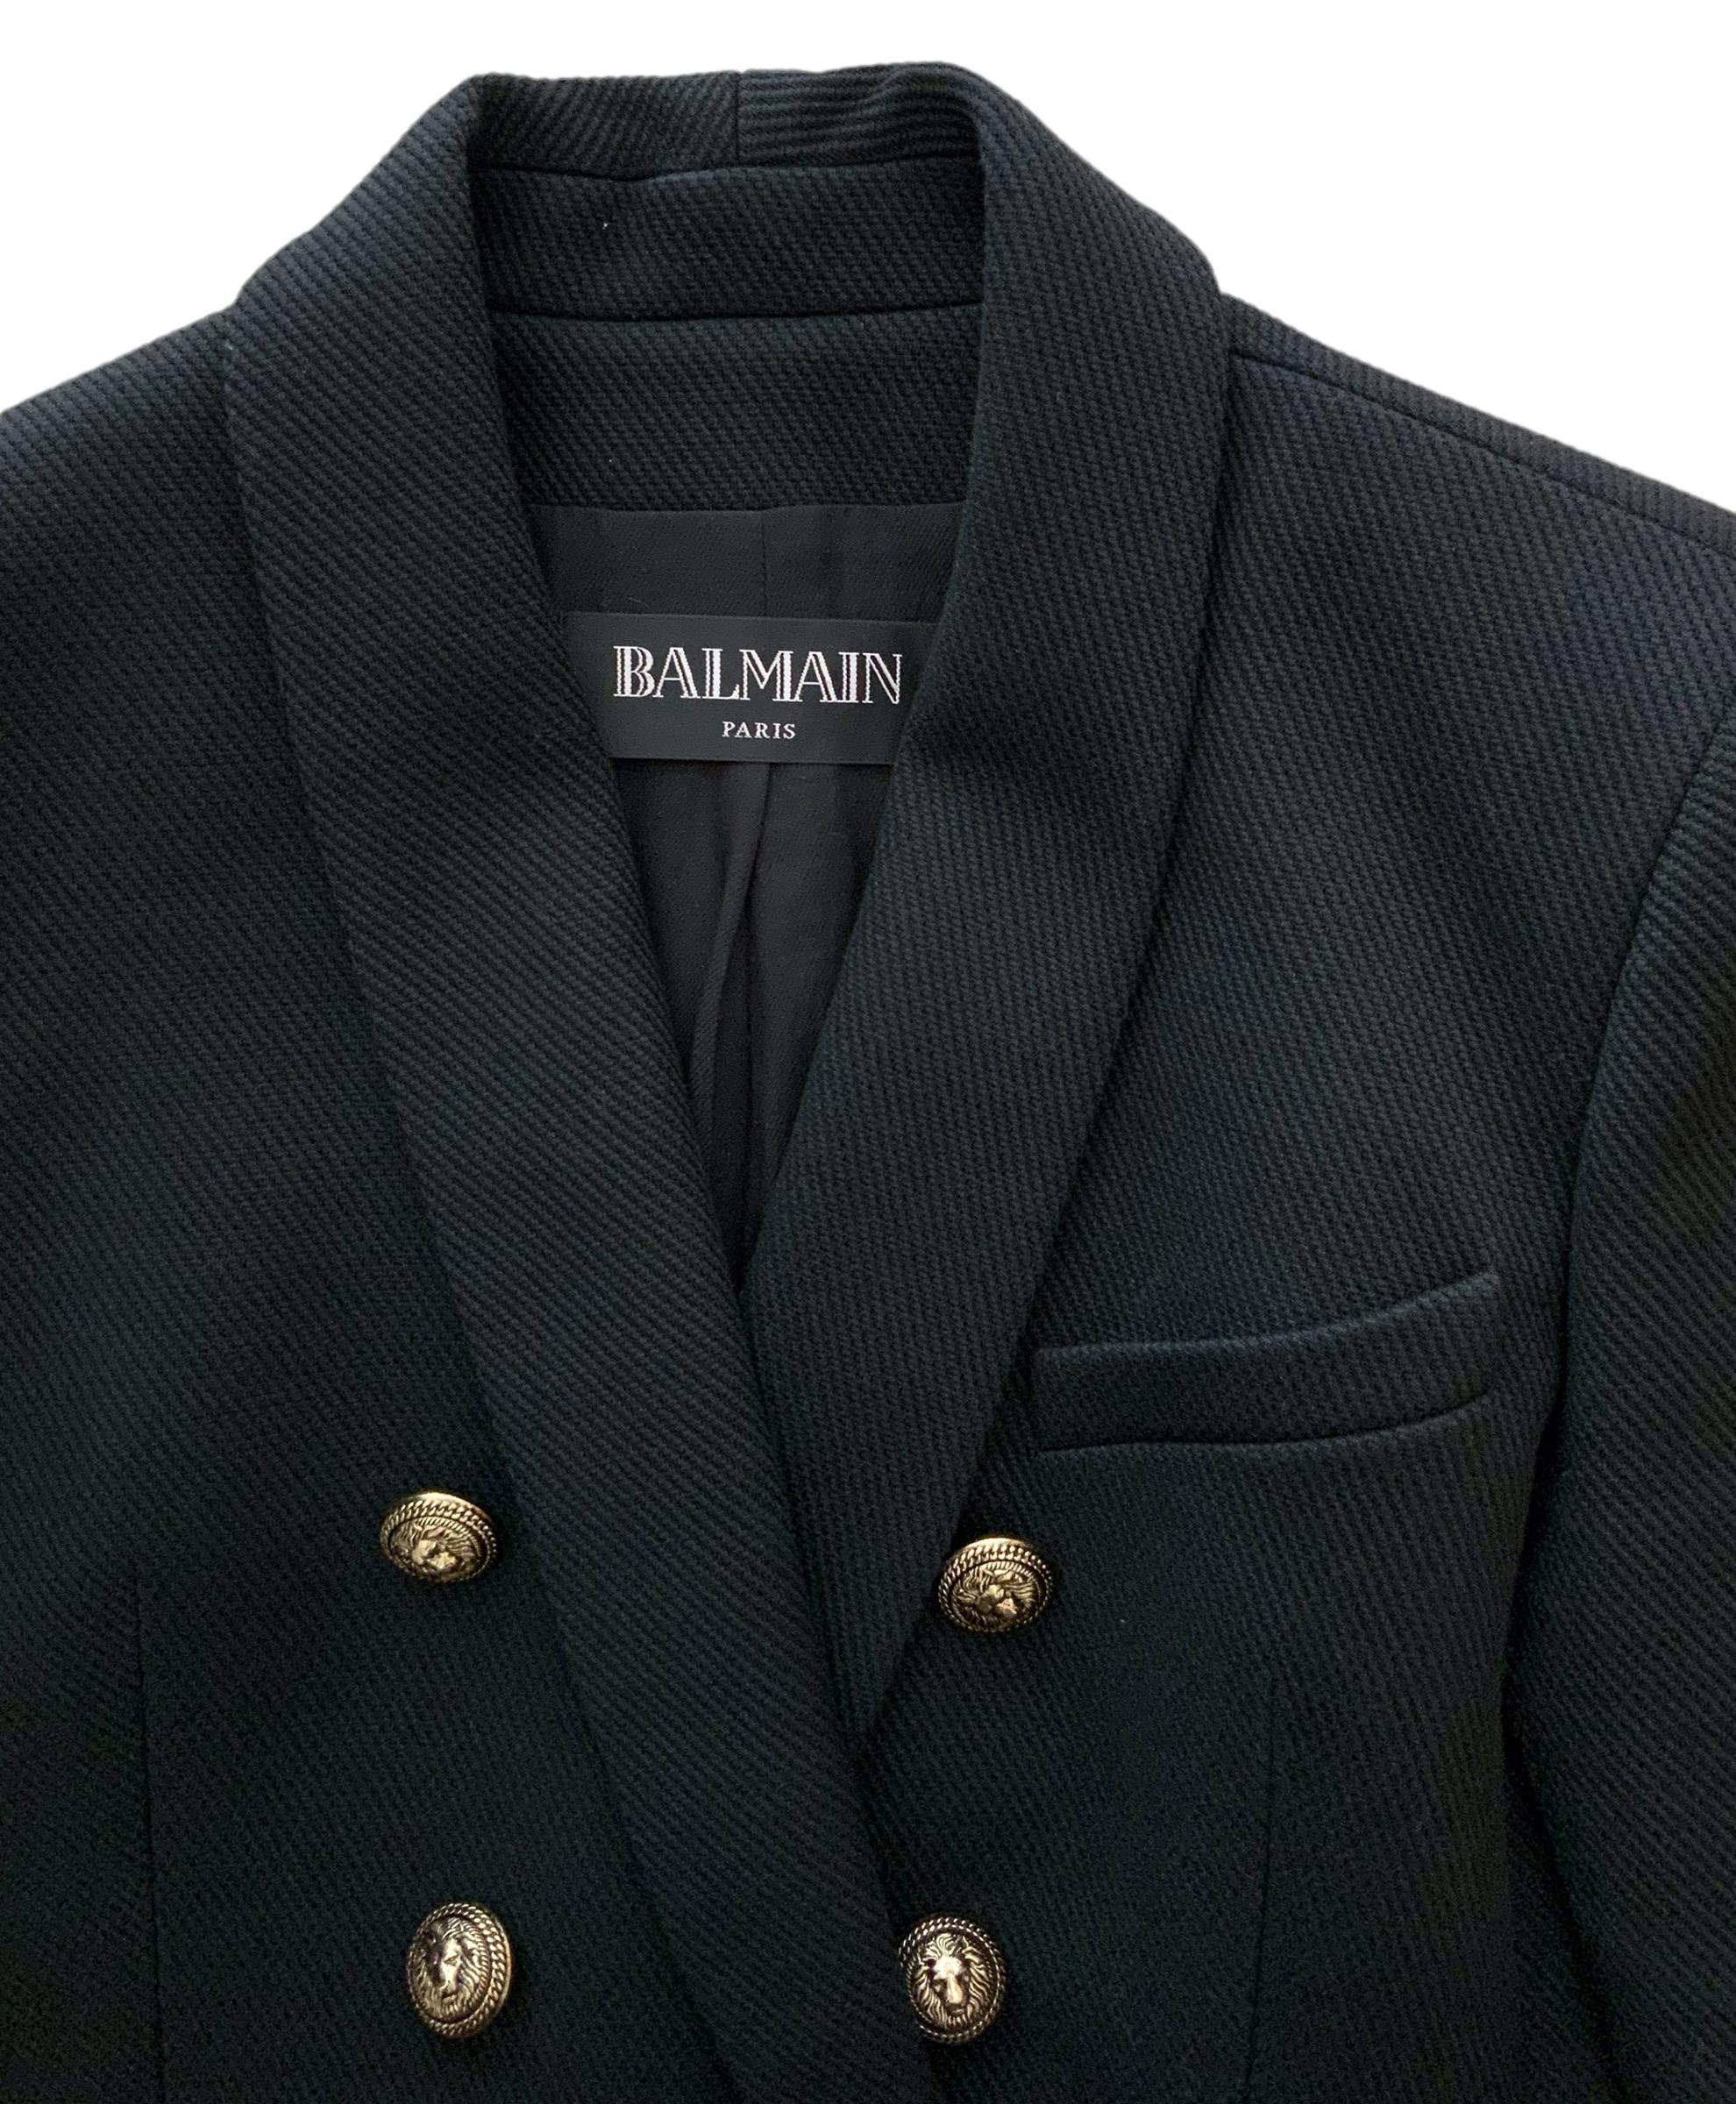 This double-breasted blazer from the house of Balmain is a classic and iconic piece.
It features shawl collar, front flap pockets, double-breasted button fastening (x2) and 4 buttons for style, shoulder pads and long sleeves with 5x buttons.

Year: